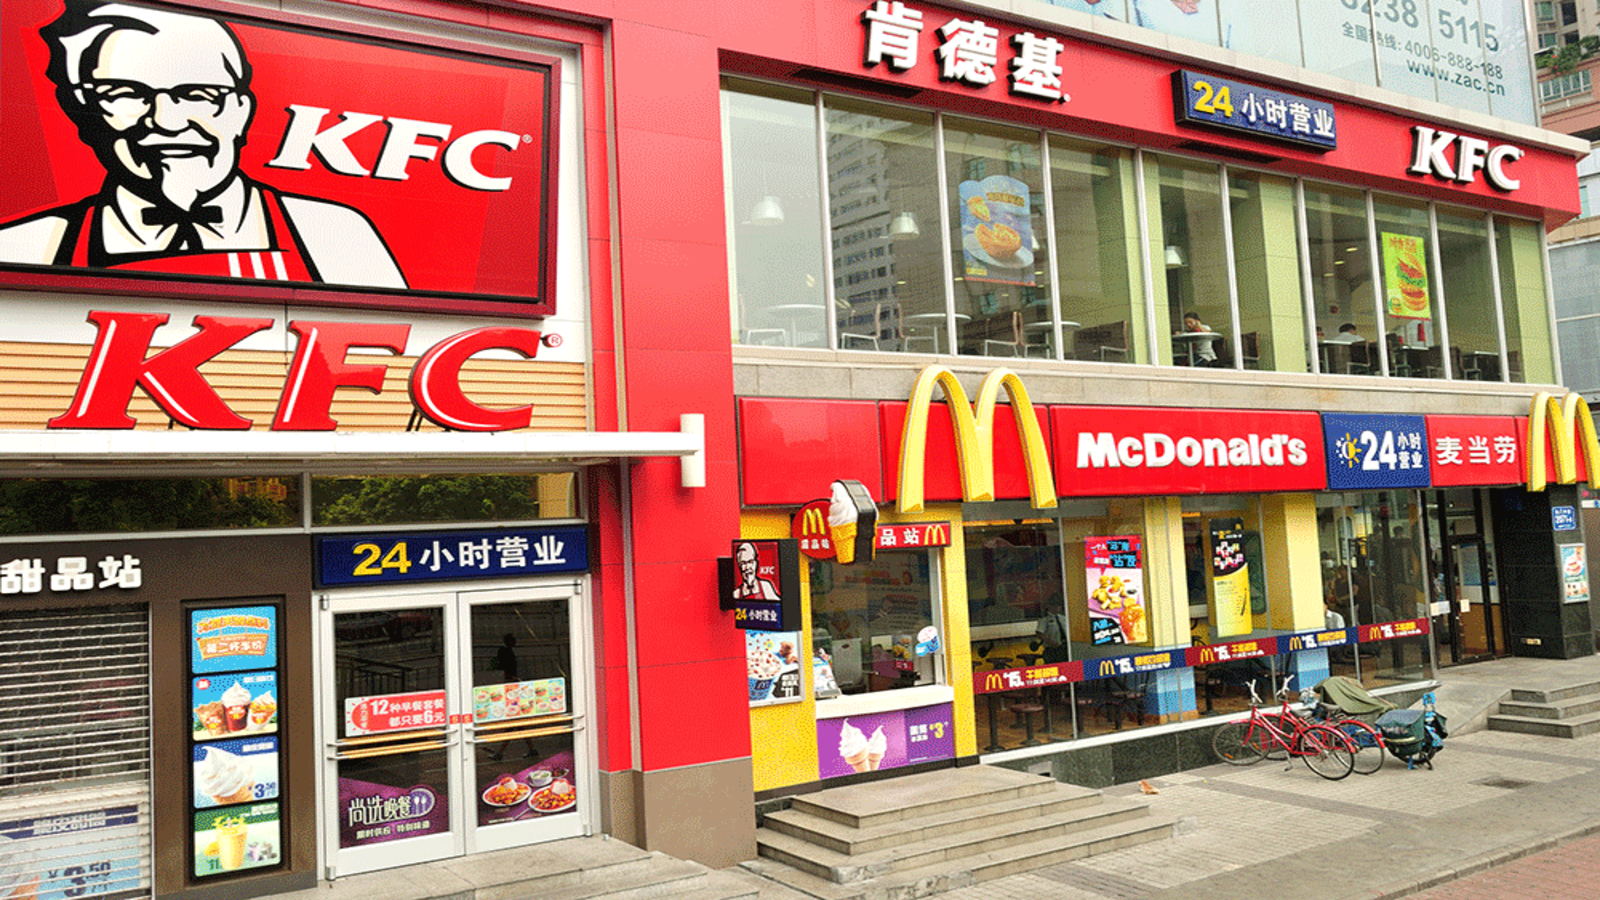 Yum! Brands, McDonald’s post double digit growth driven by away from home consumption rebound